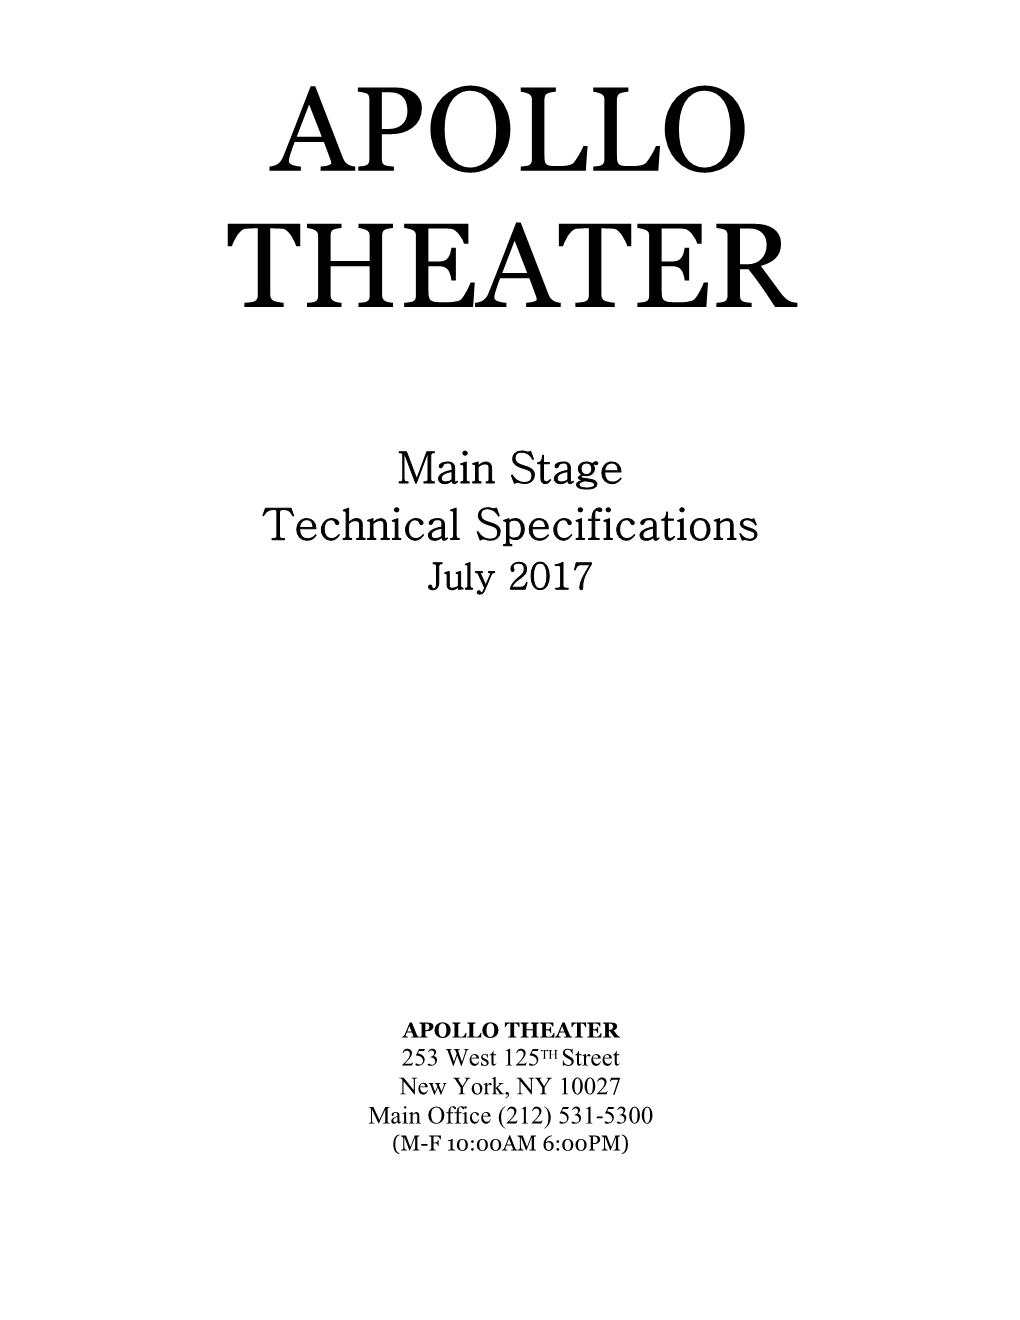 Main Stage Technical Specifications July 2017